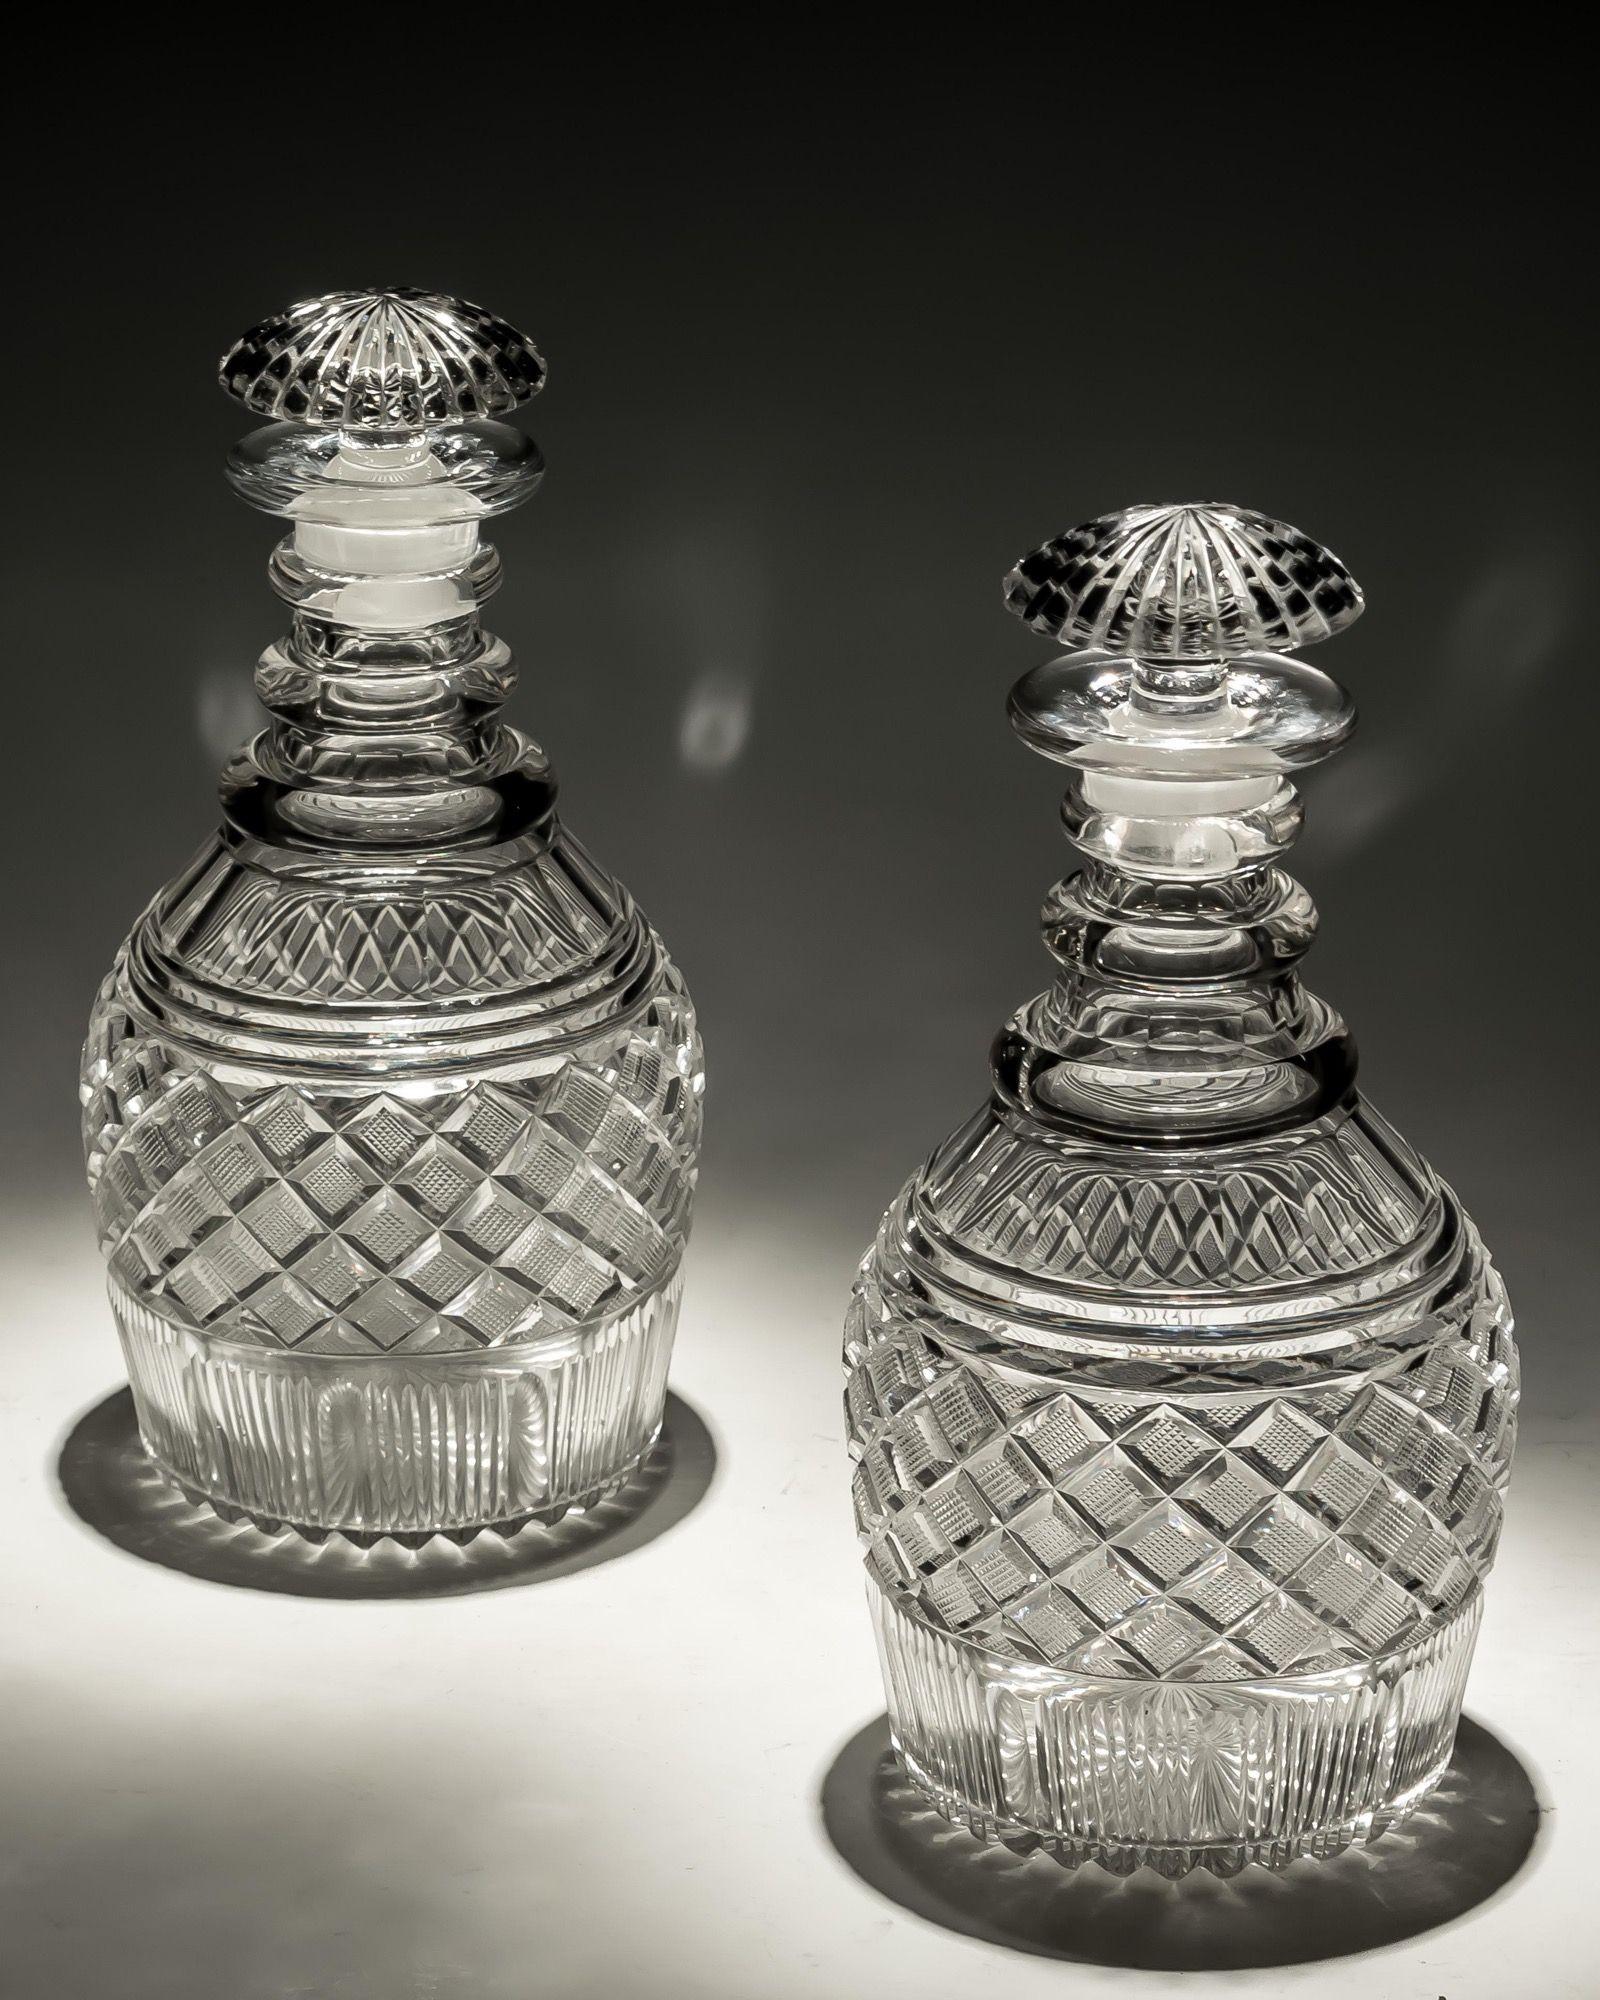 A pair of strawberry diamond cut Georgian decanters with mushroom stoppers.